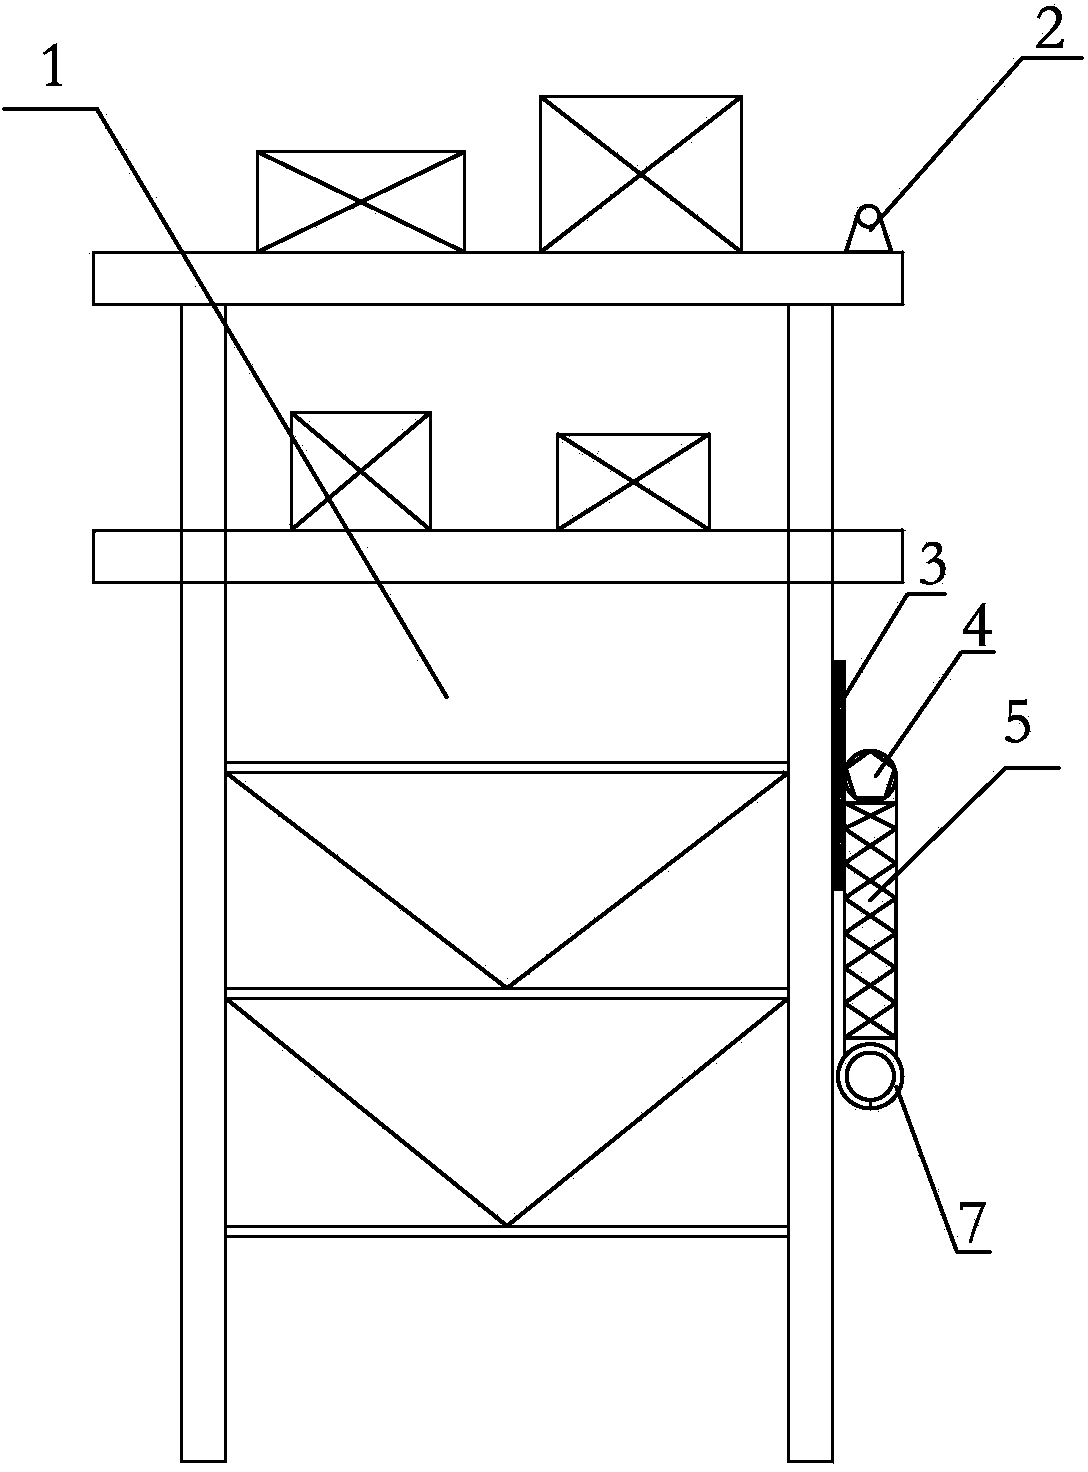 Cantilever-type slidable anti-collision connection device for ship berthing platform